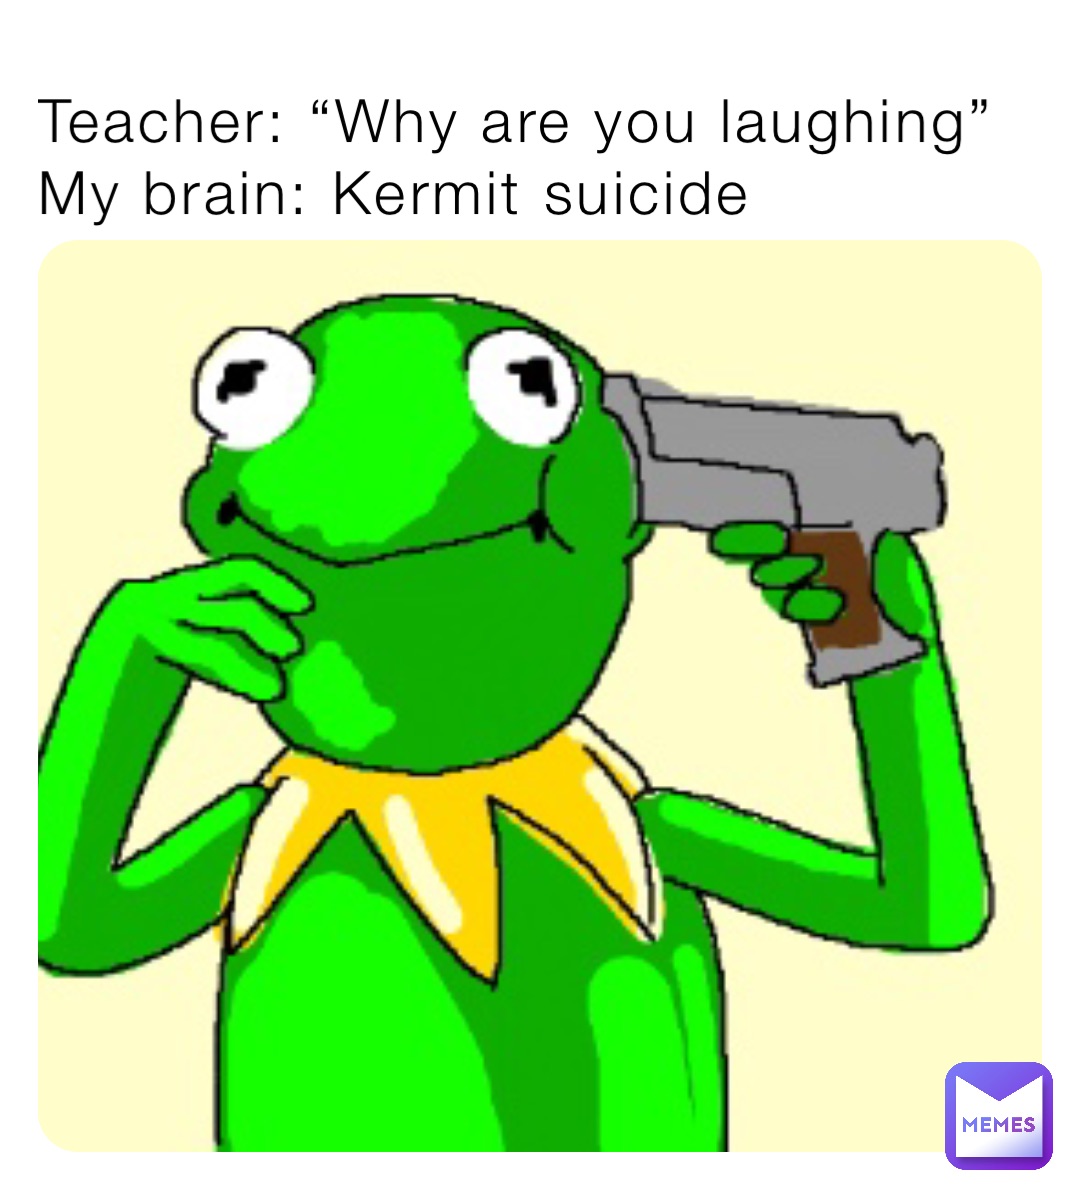 Teacher: “Why are you laughing”
My brain: Kermit suicide